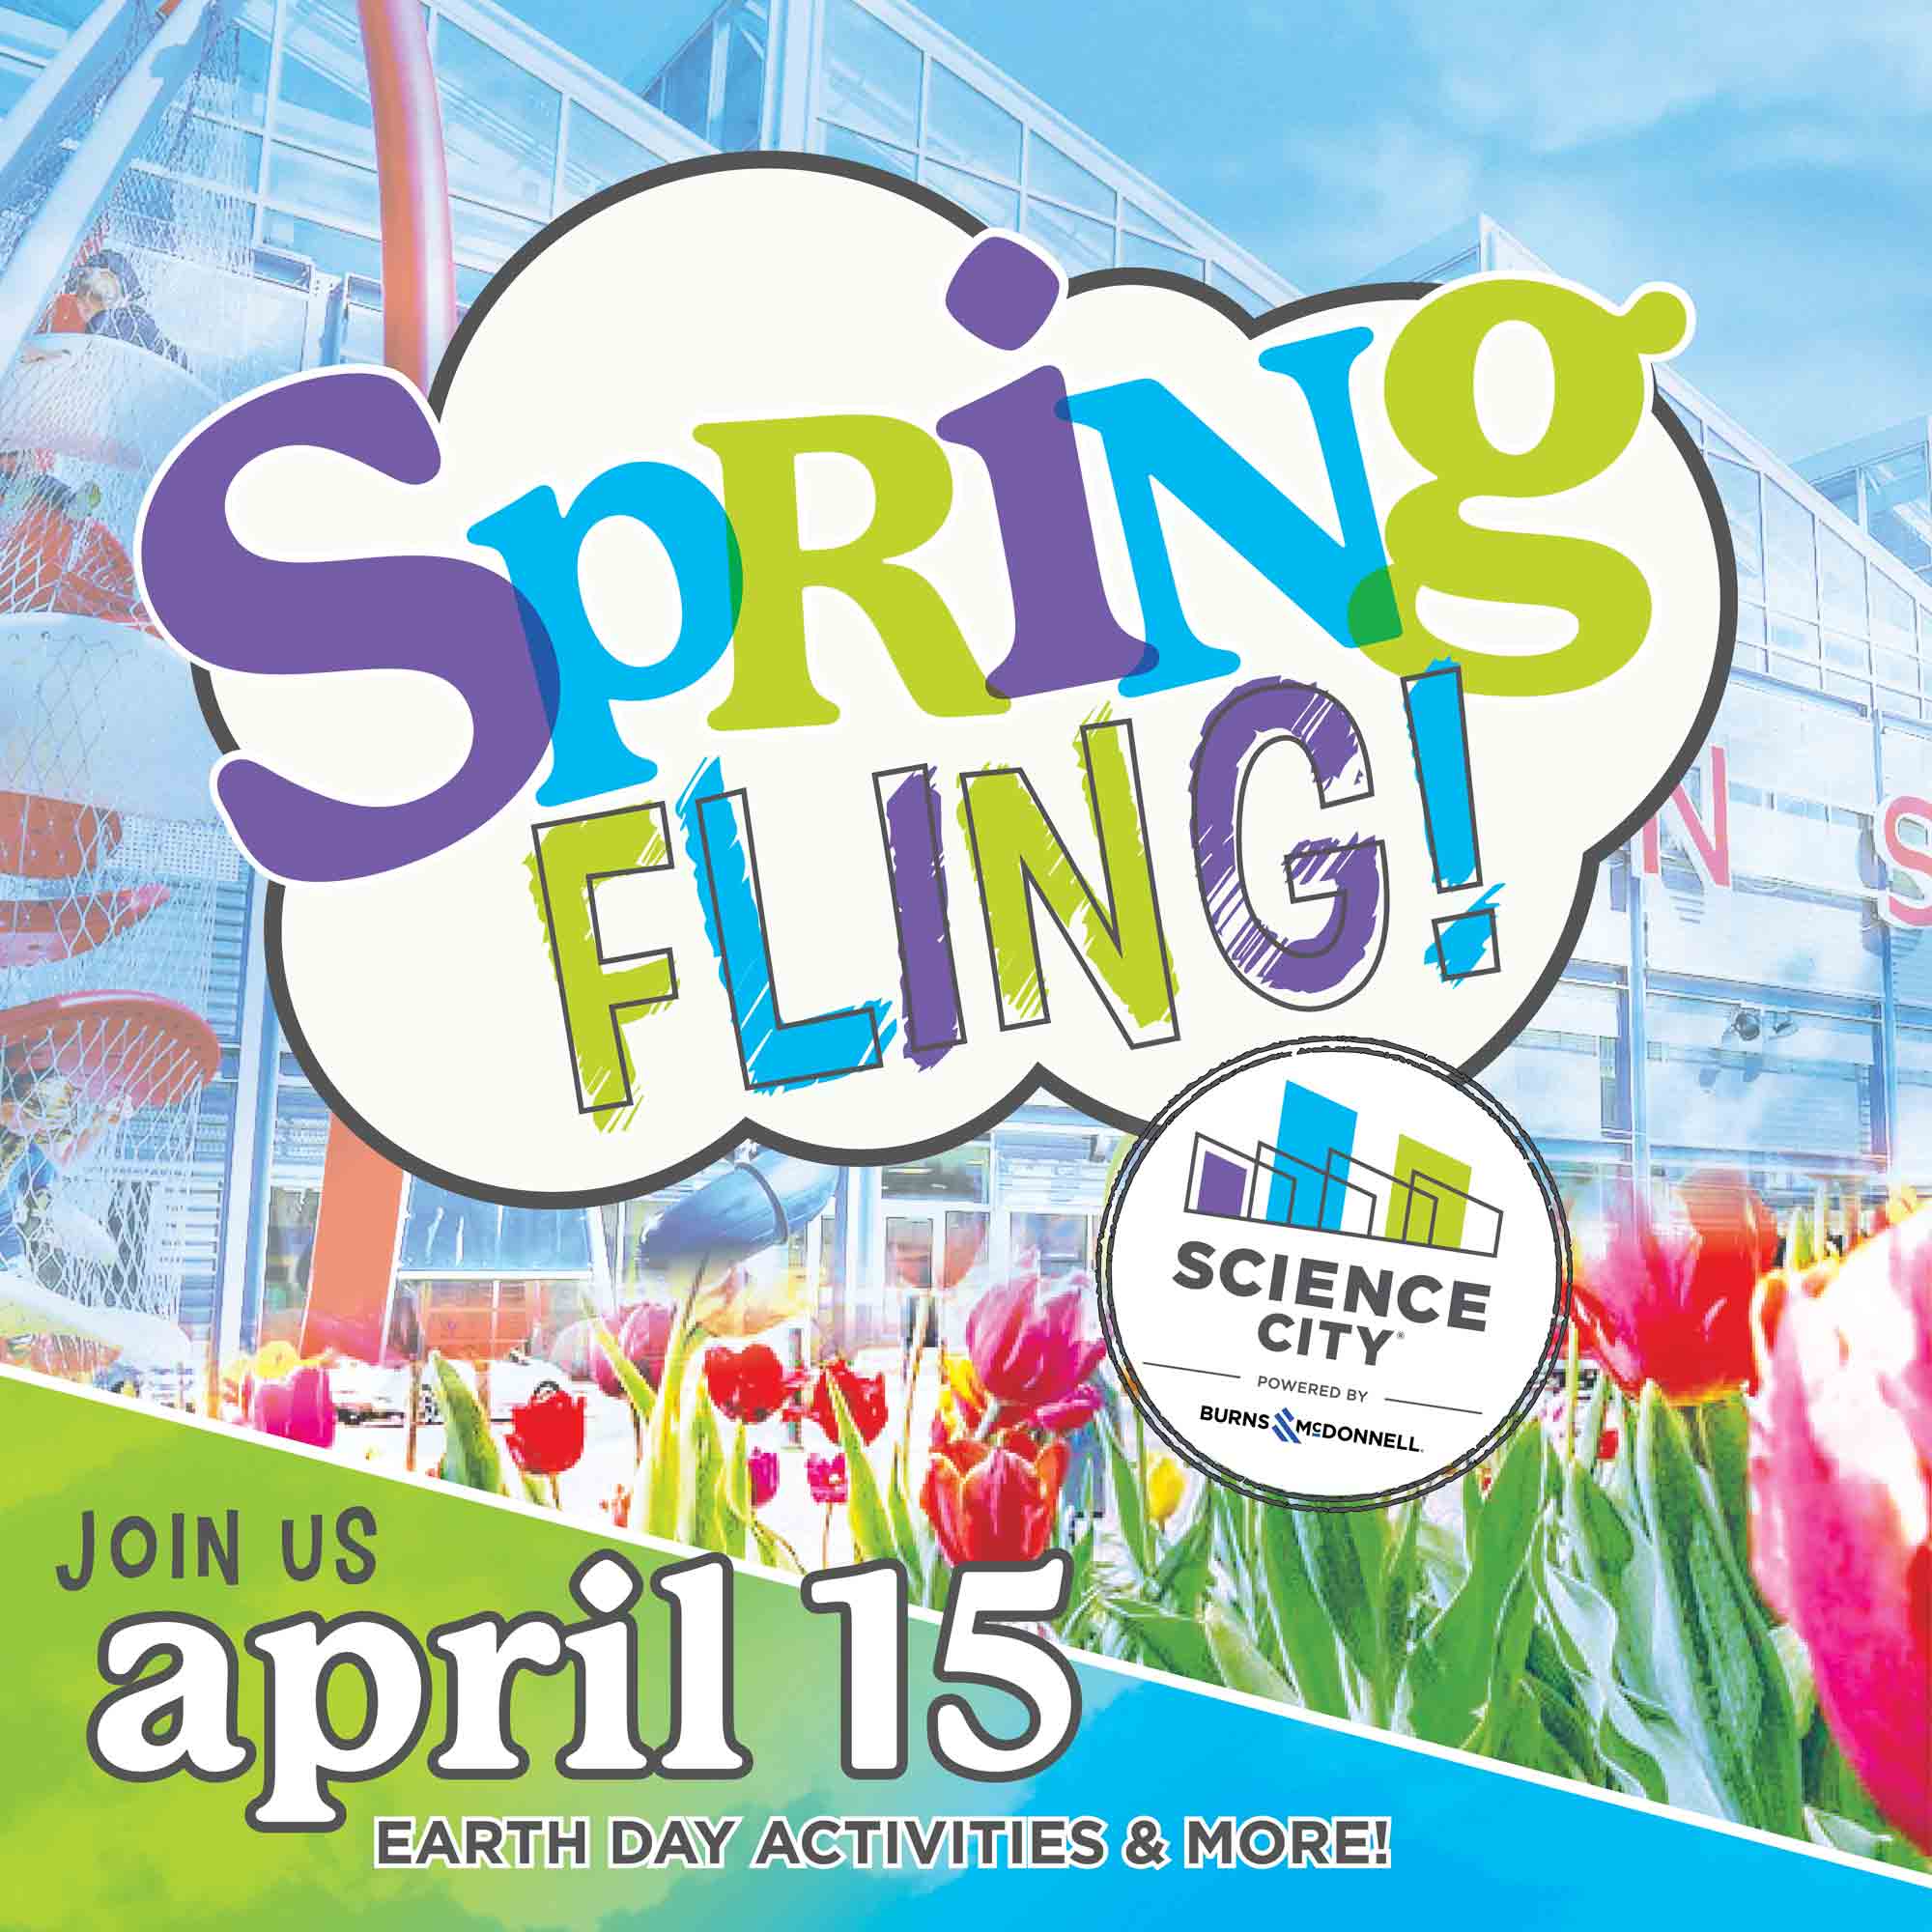 Logo for Spring Fling at Science City. Featuring bright festive colors and flowers.